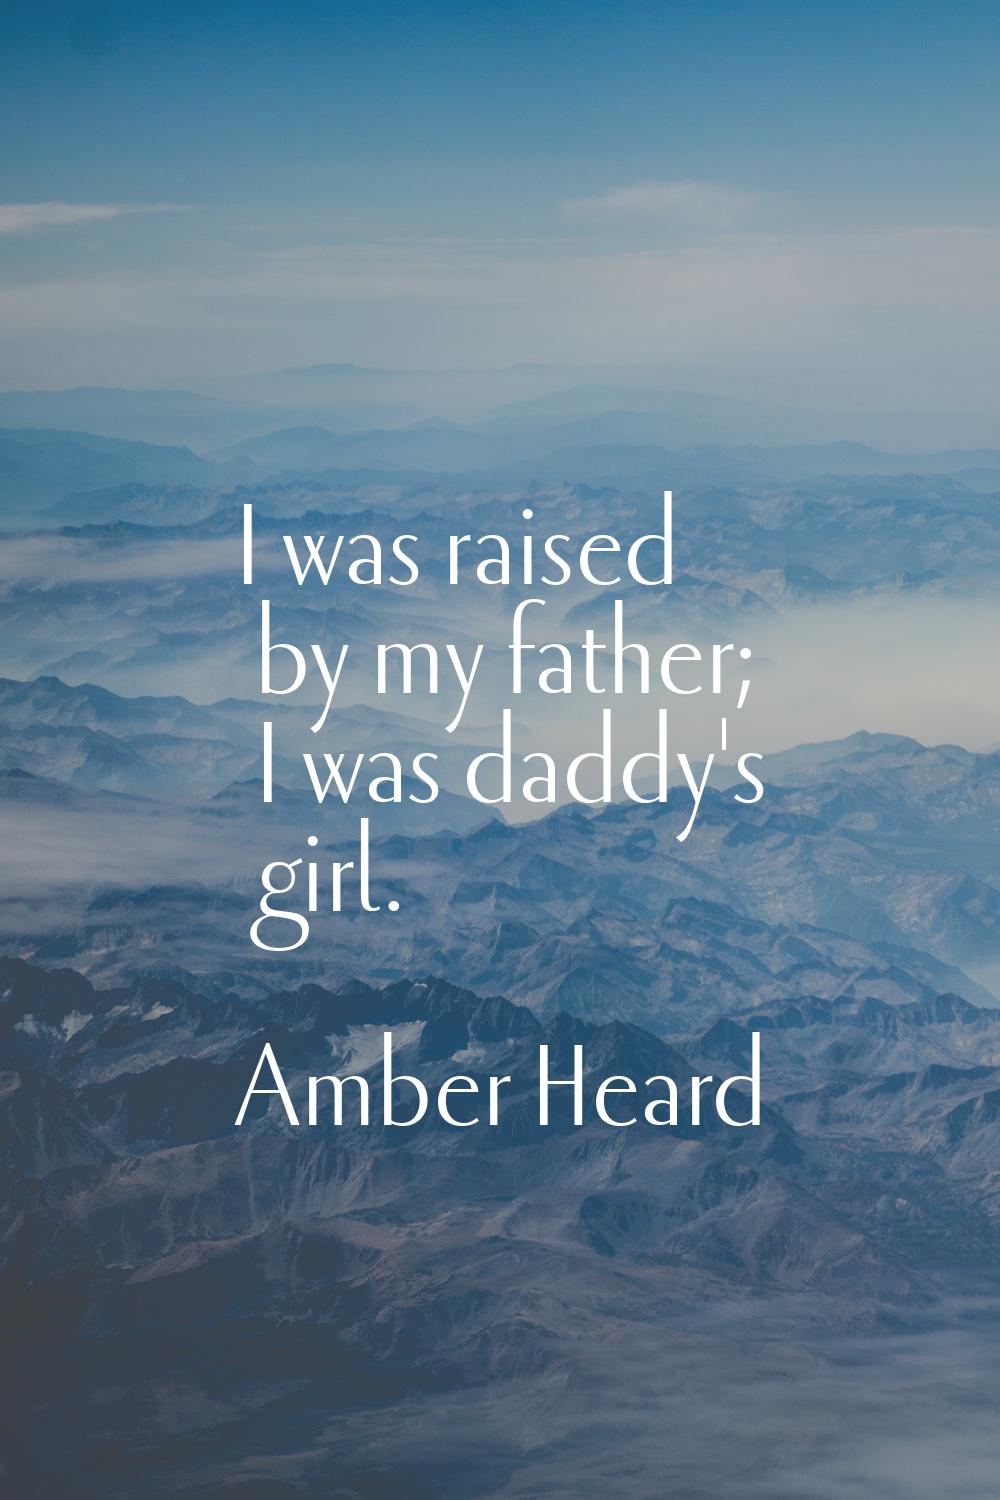 I was raised by my father; I was daddy's girl.